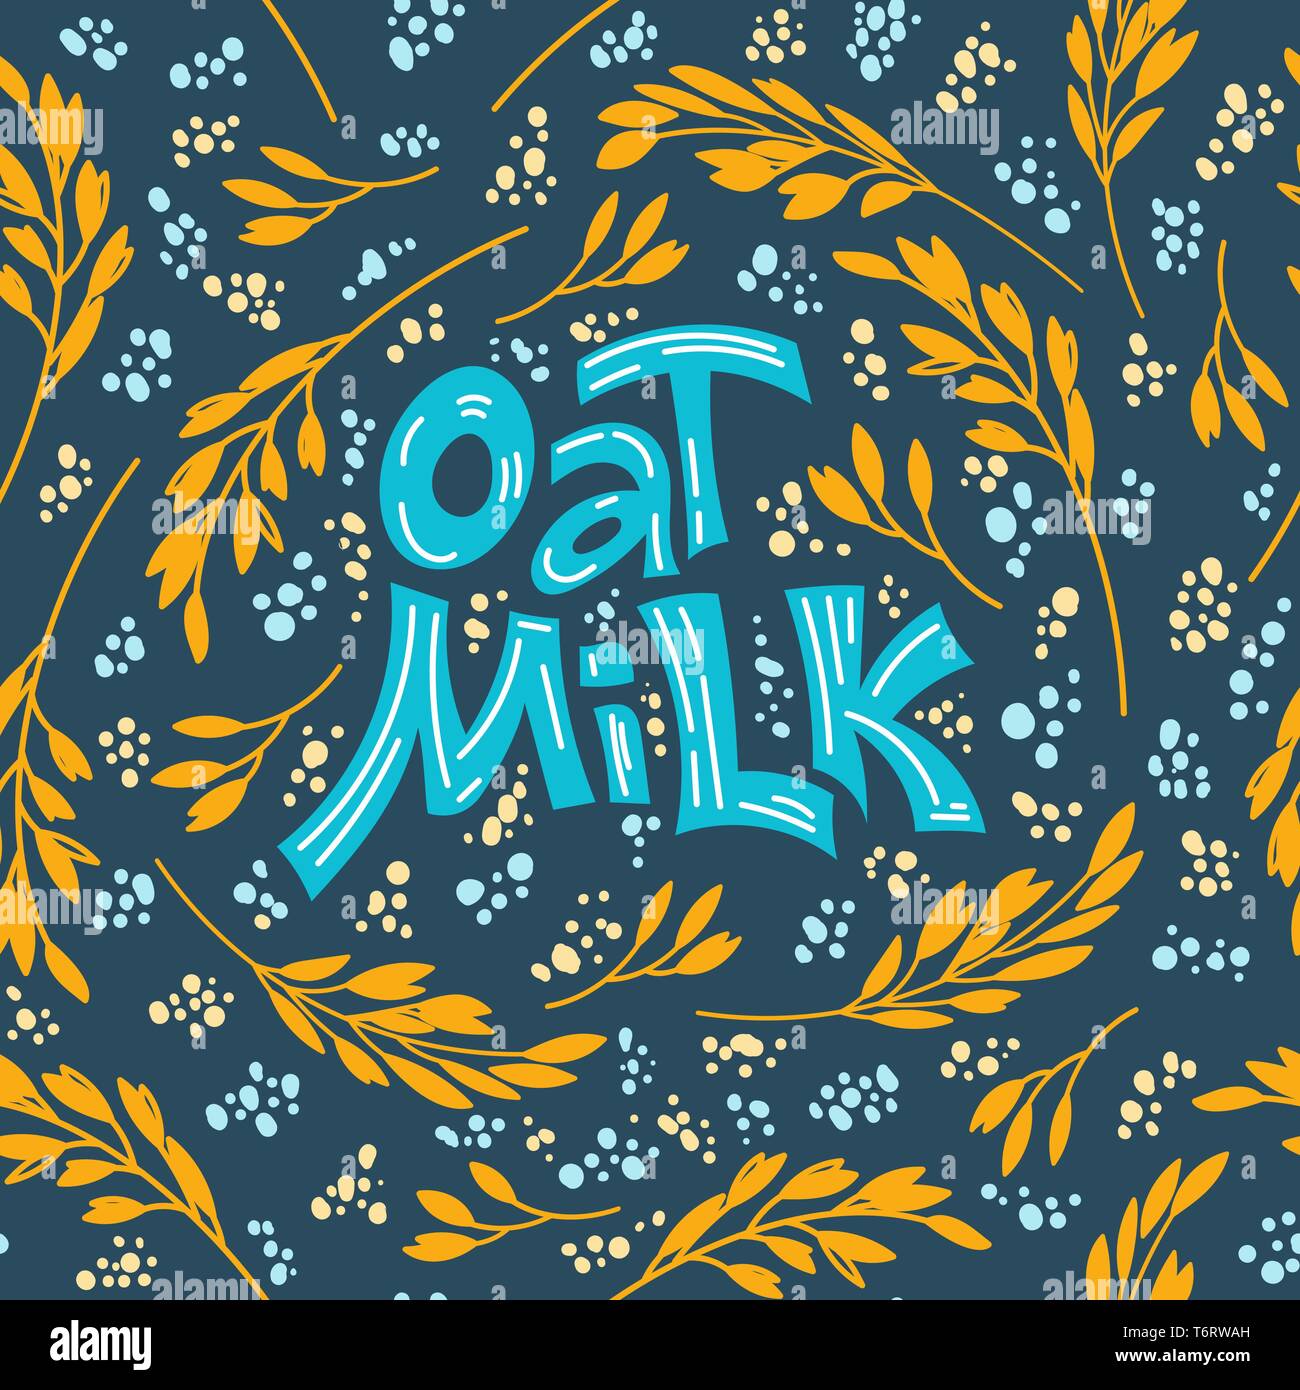 Seamlees pattern background. Oat milk hand drawn lettering. Spikes and grains of oats, glass with oat milk, carton box and glass jar of milk. Doodle style, vector illustration. Stock Vector